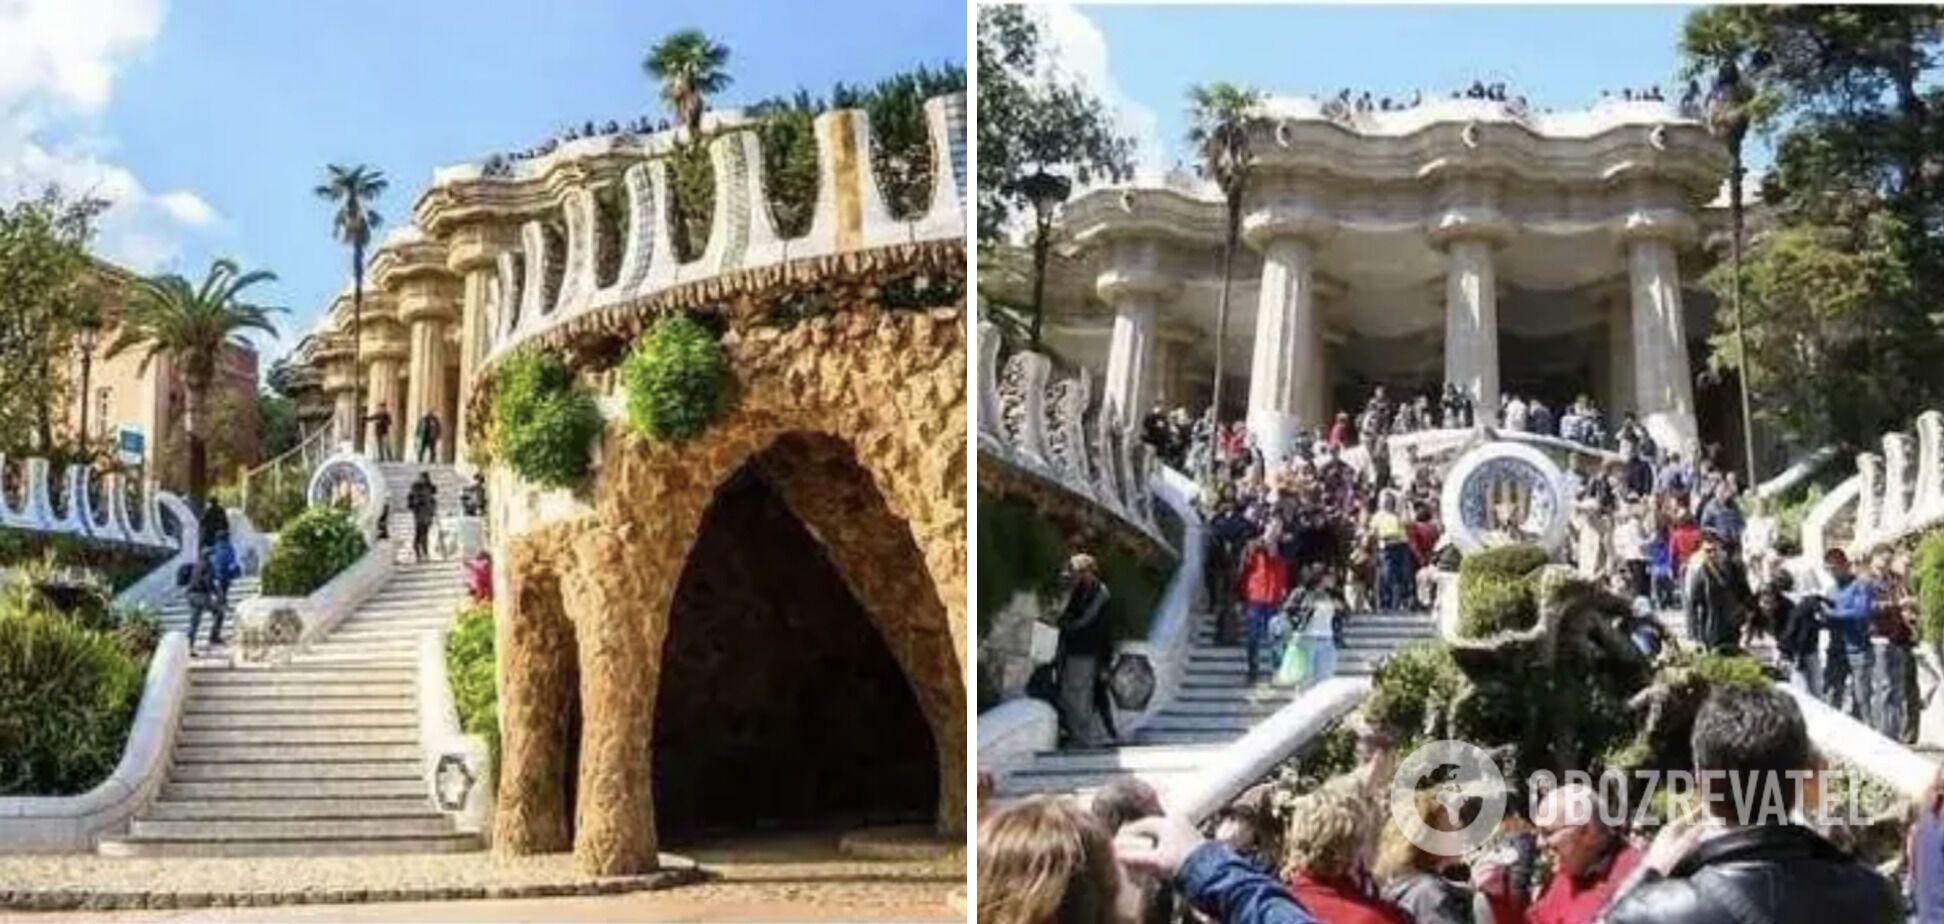 Park Güell is overflowing with tourists